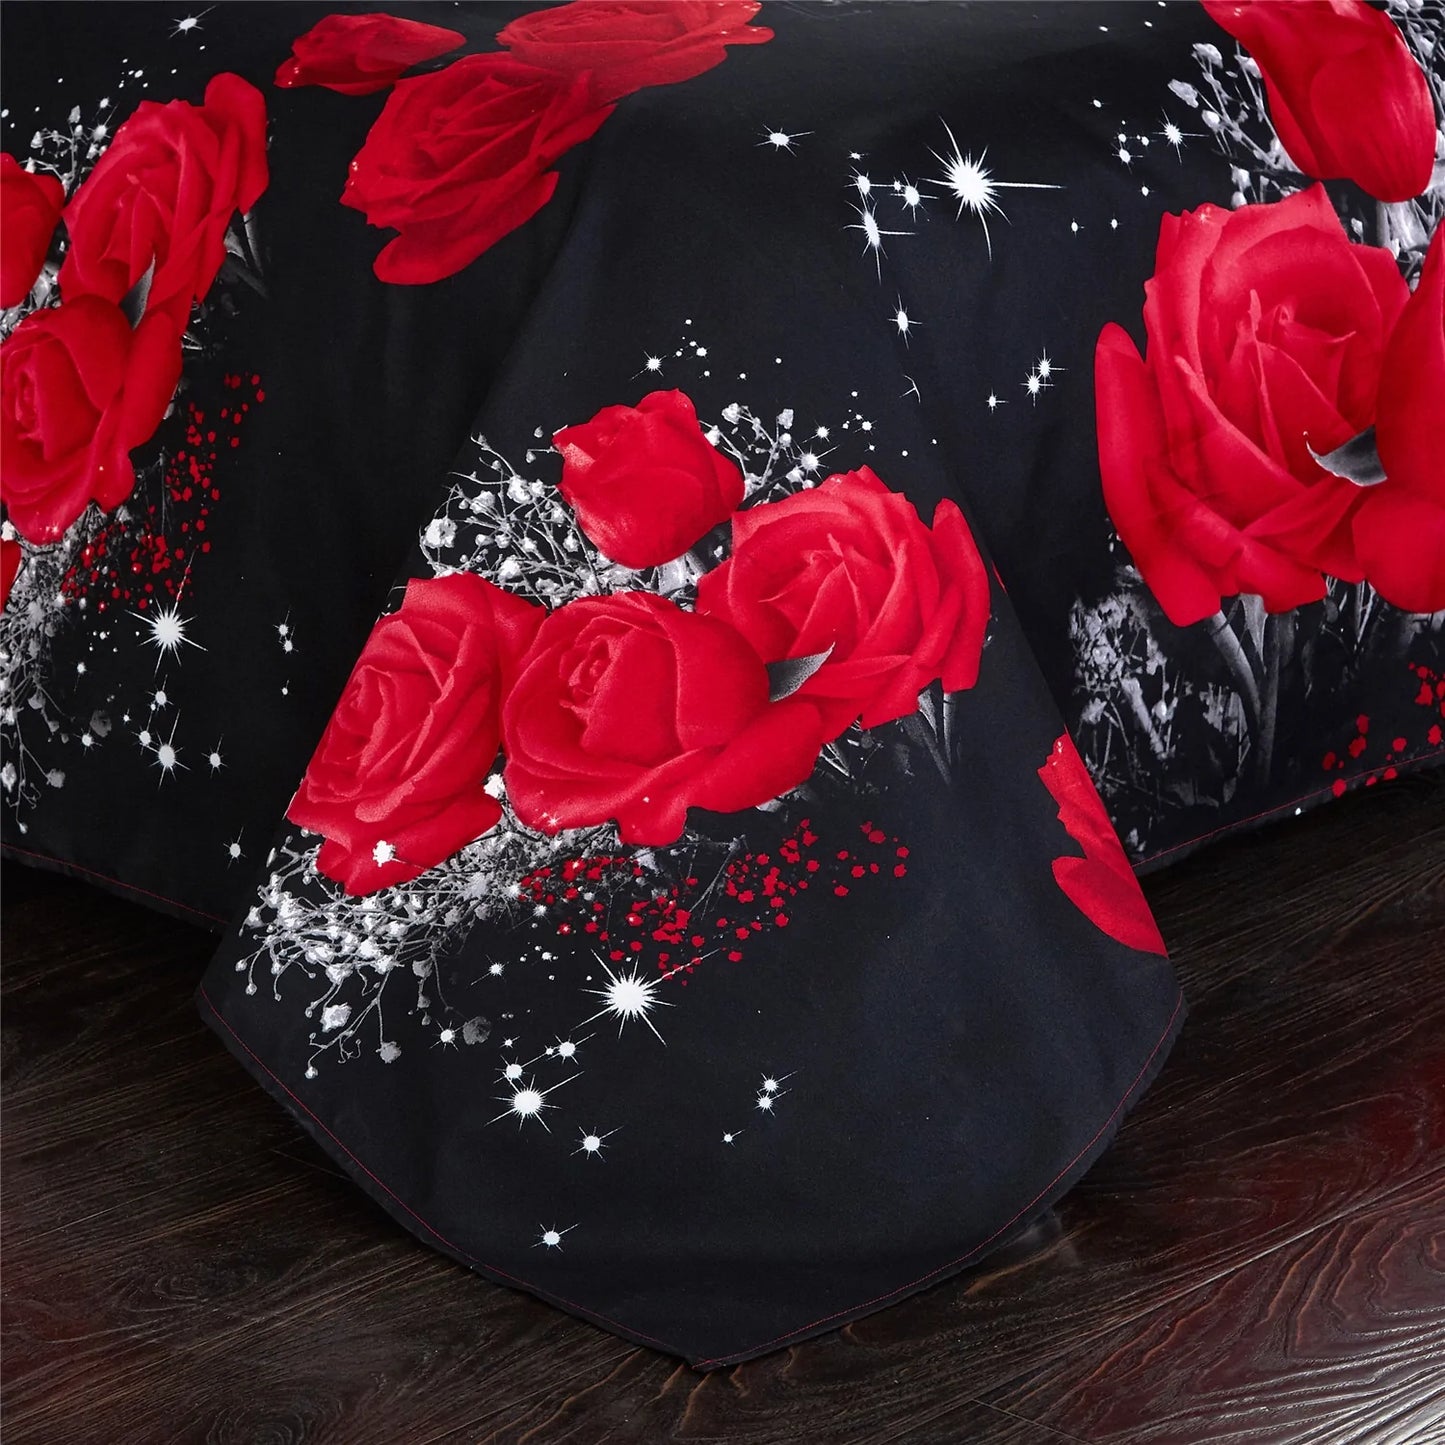 Modern Luxury Red Rose Bedding Set - King/Queen/Twin Size